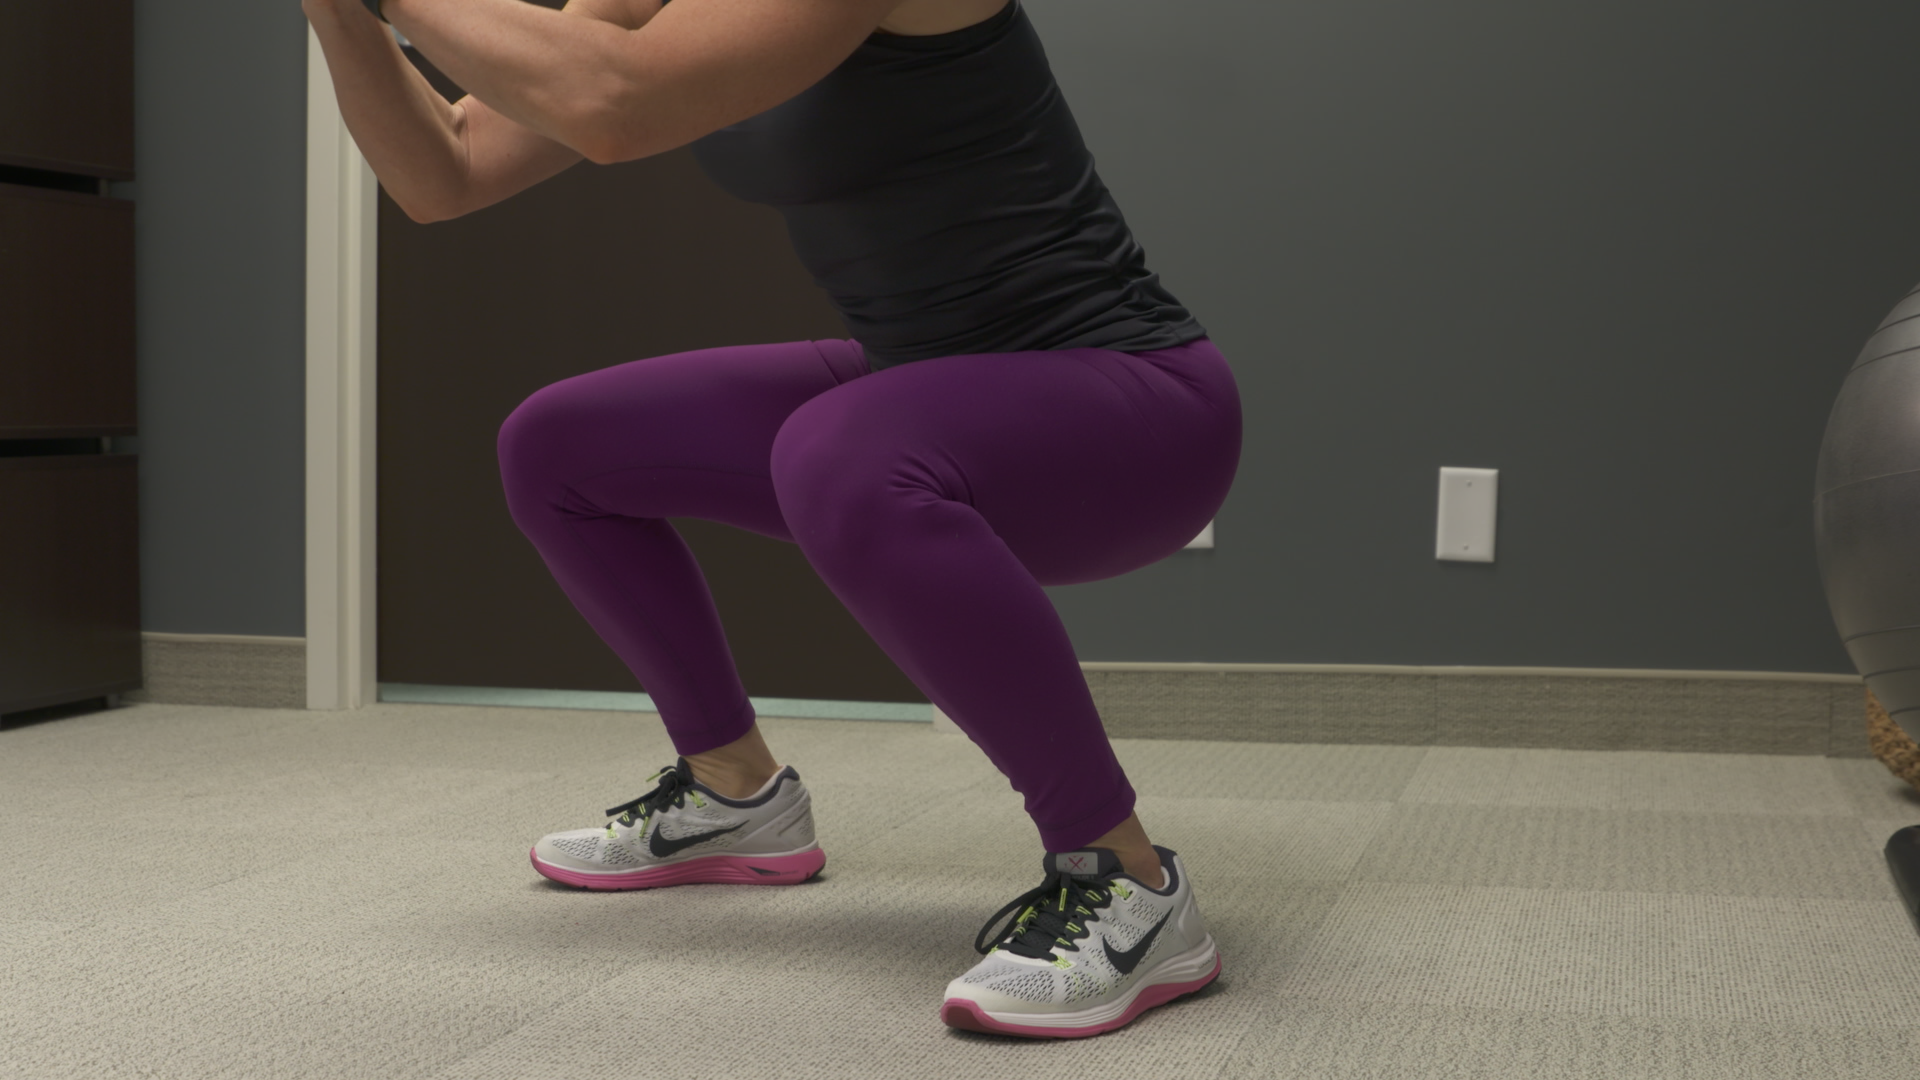 Squat Variations to Keep Your Muscles Working [Video]